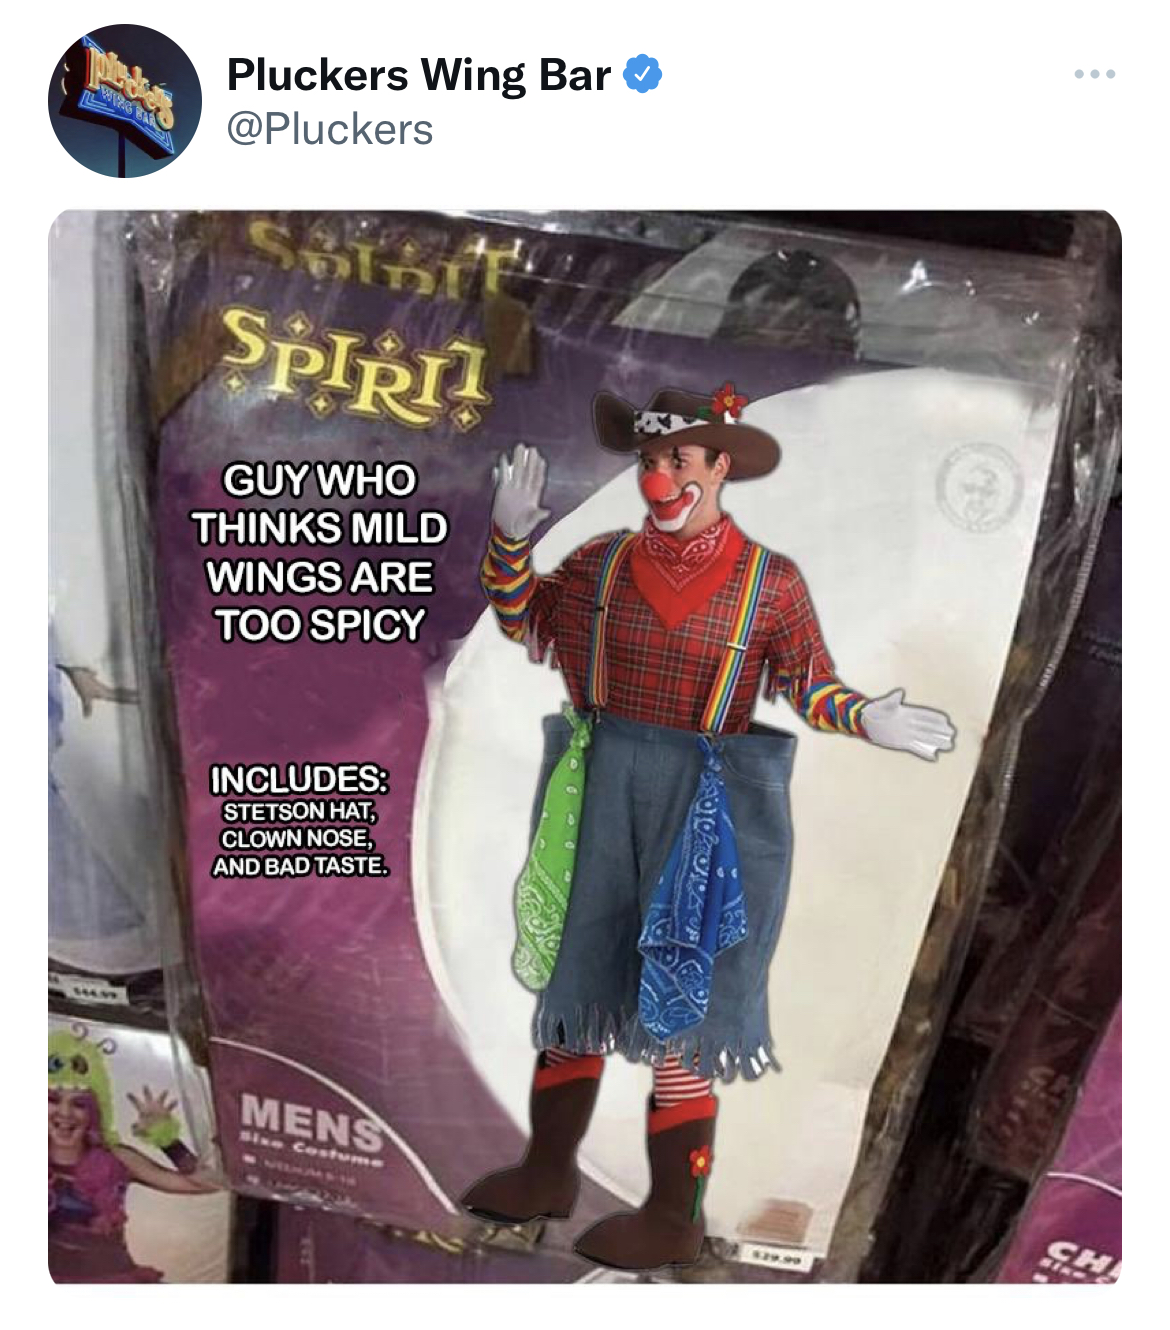 savage tweets - action figure - Medar Pluckers Wing Bar Spirit Guy Who Thinks Mild Wings Are Too Spicy Includes Stetson Hat, Clown Nose, And Bad Taste. Mens w Costume